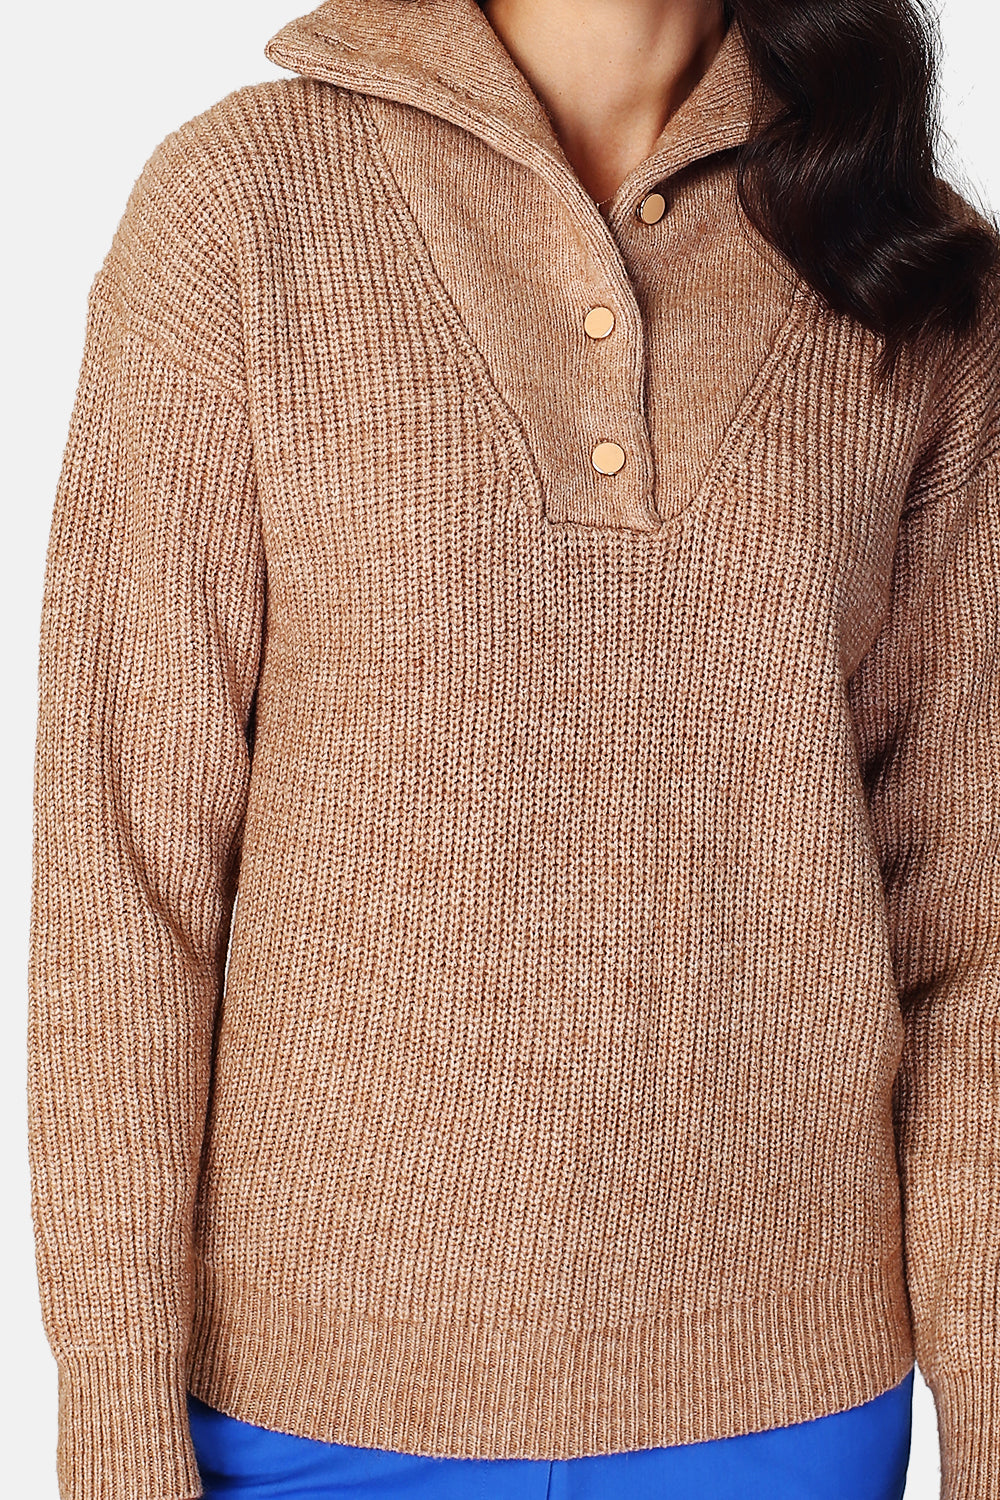 High neck sweater closed by a button placket in beaded rib knit with long sleeves